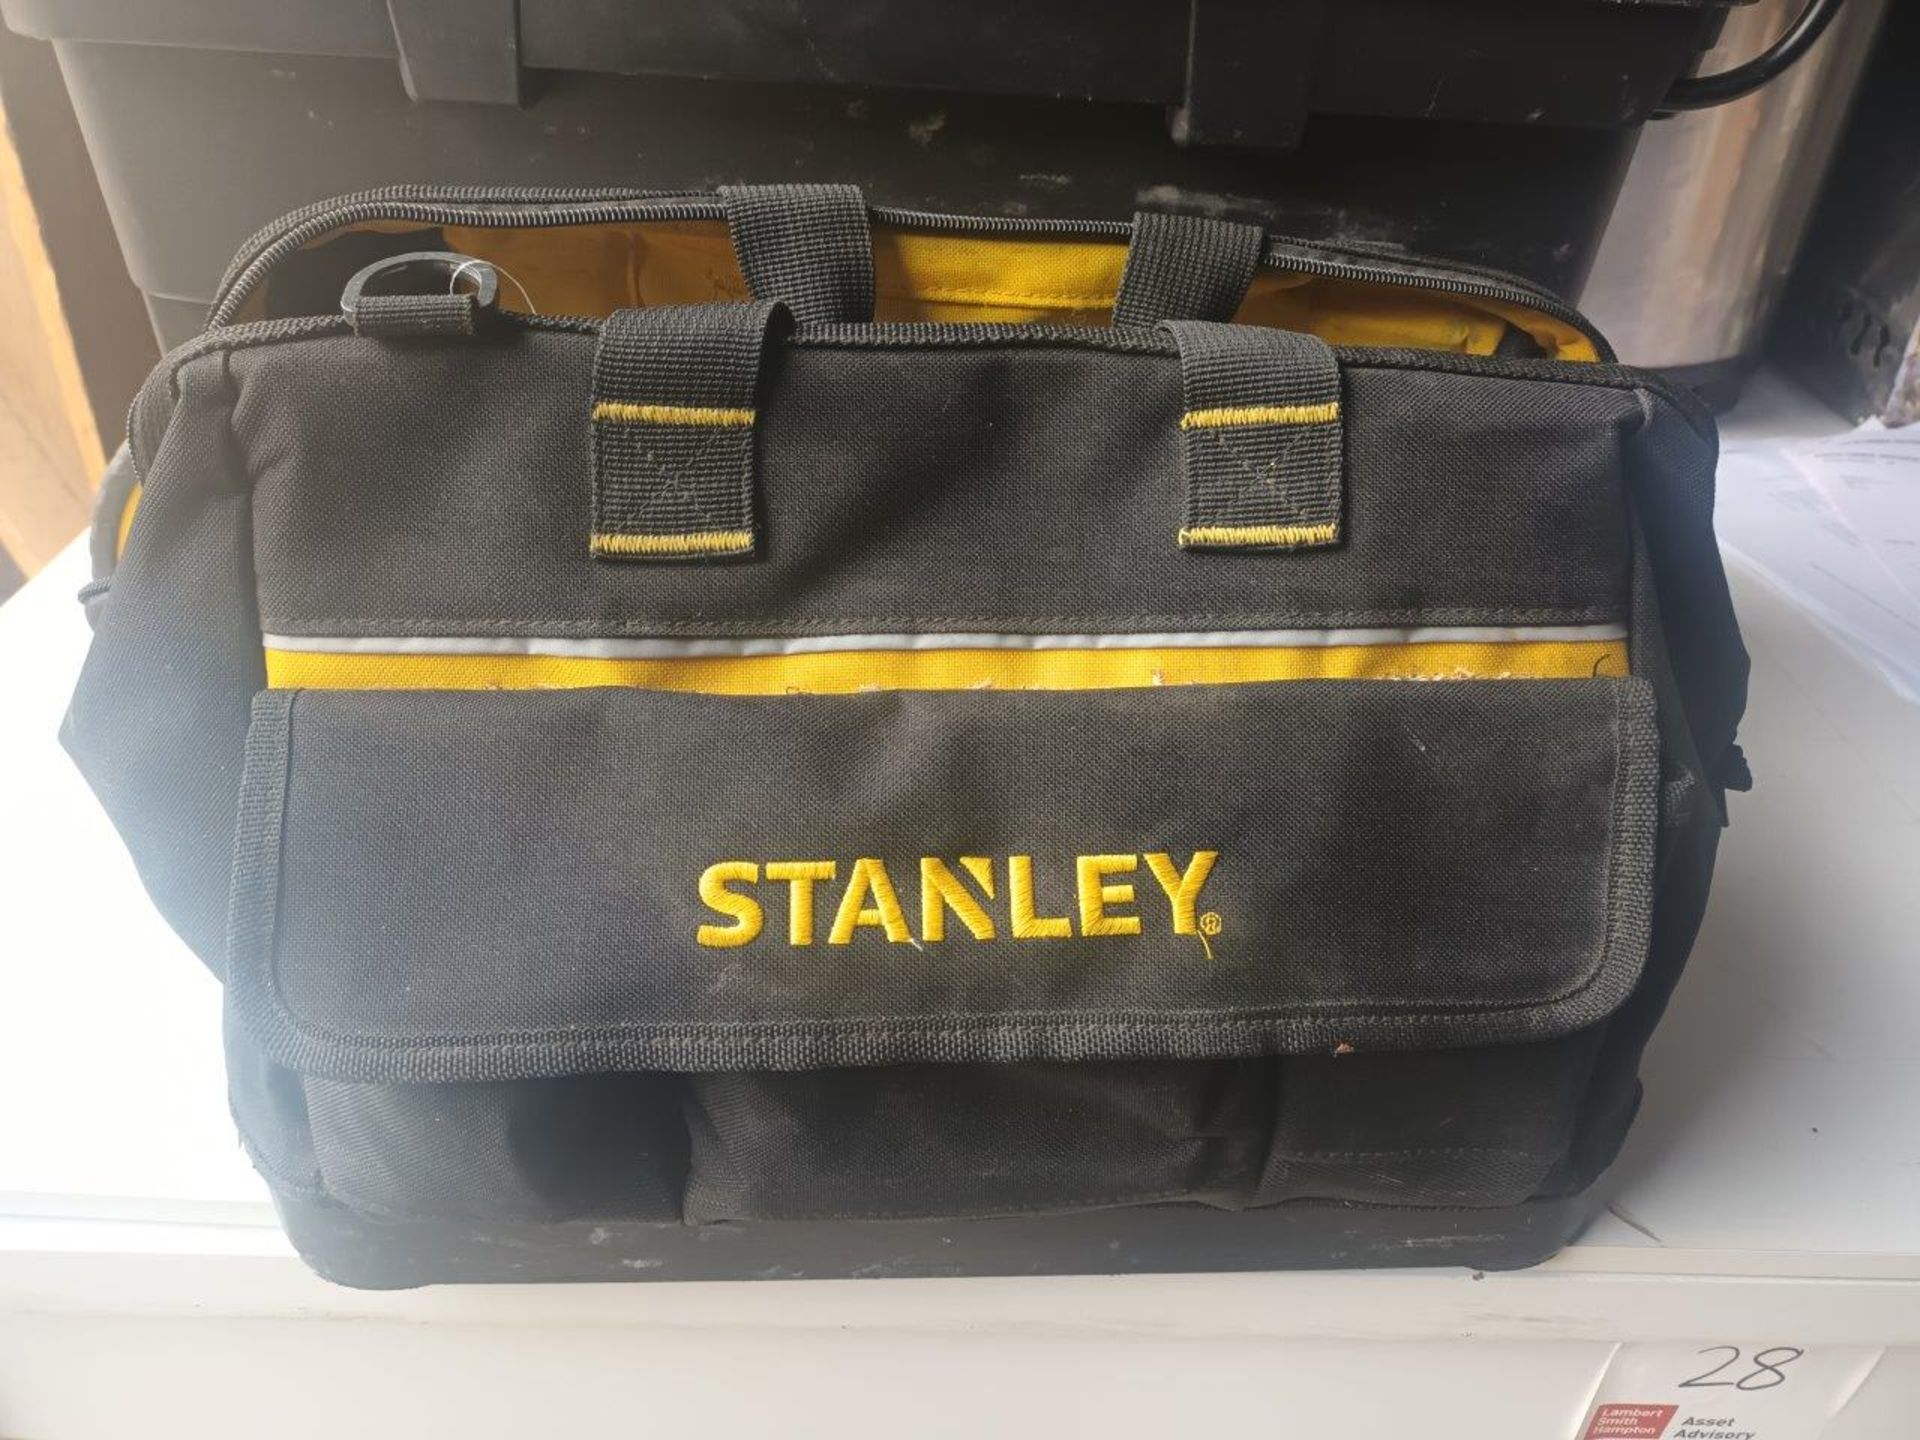 Stanley tool box on wheels and Stanley tool bag with various hand tools - Bild 2 aus 4